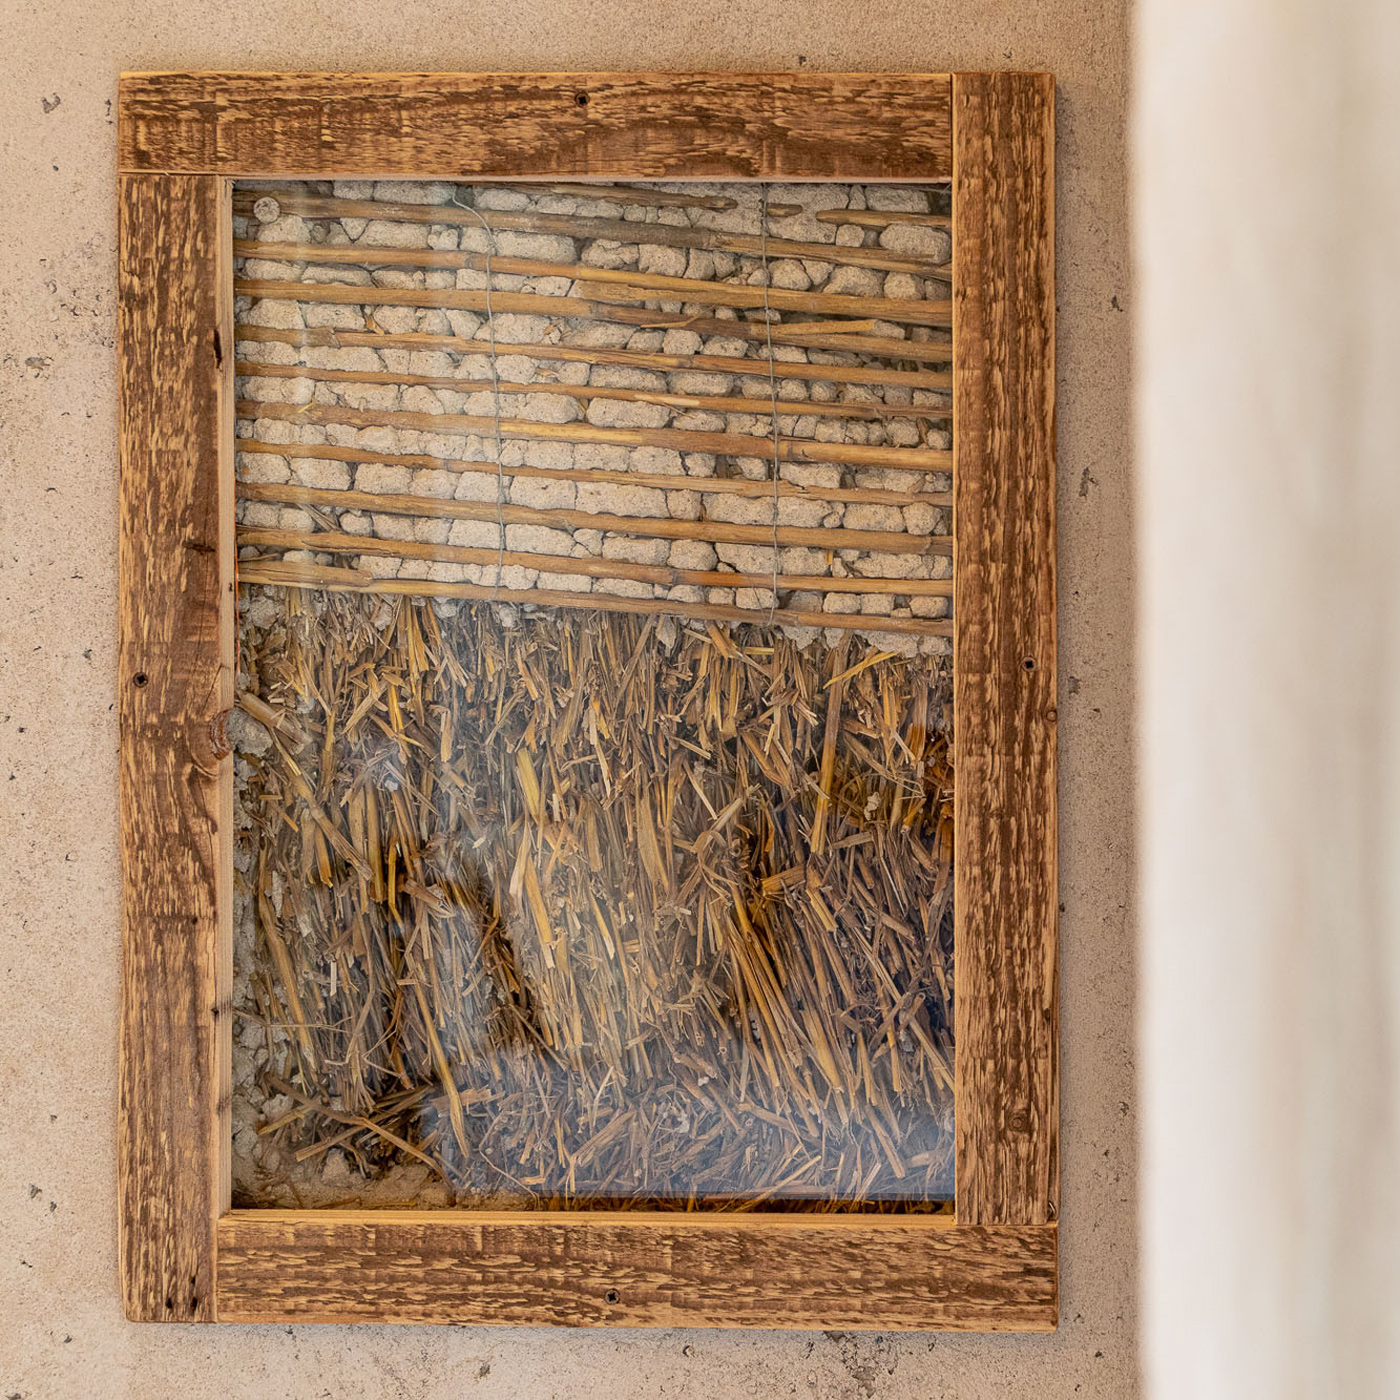 Casa Viva is a straw bale construction. The “ window of truth” allows us to have a peak at the soul of Casa Viva.